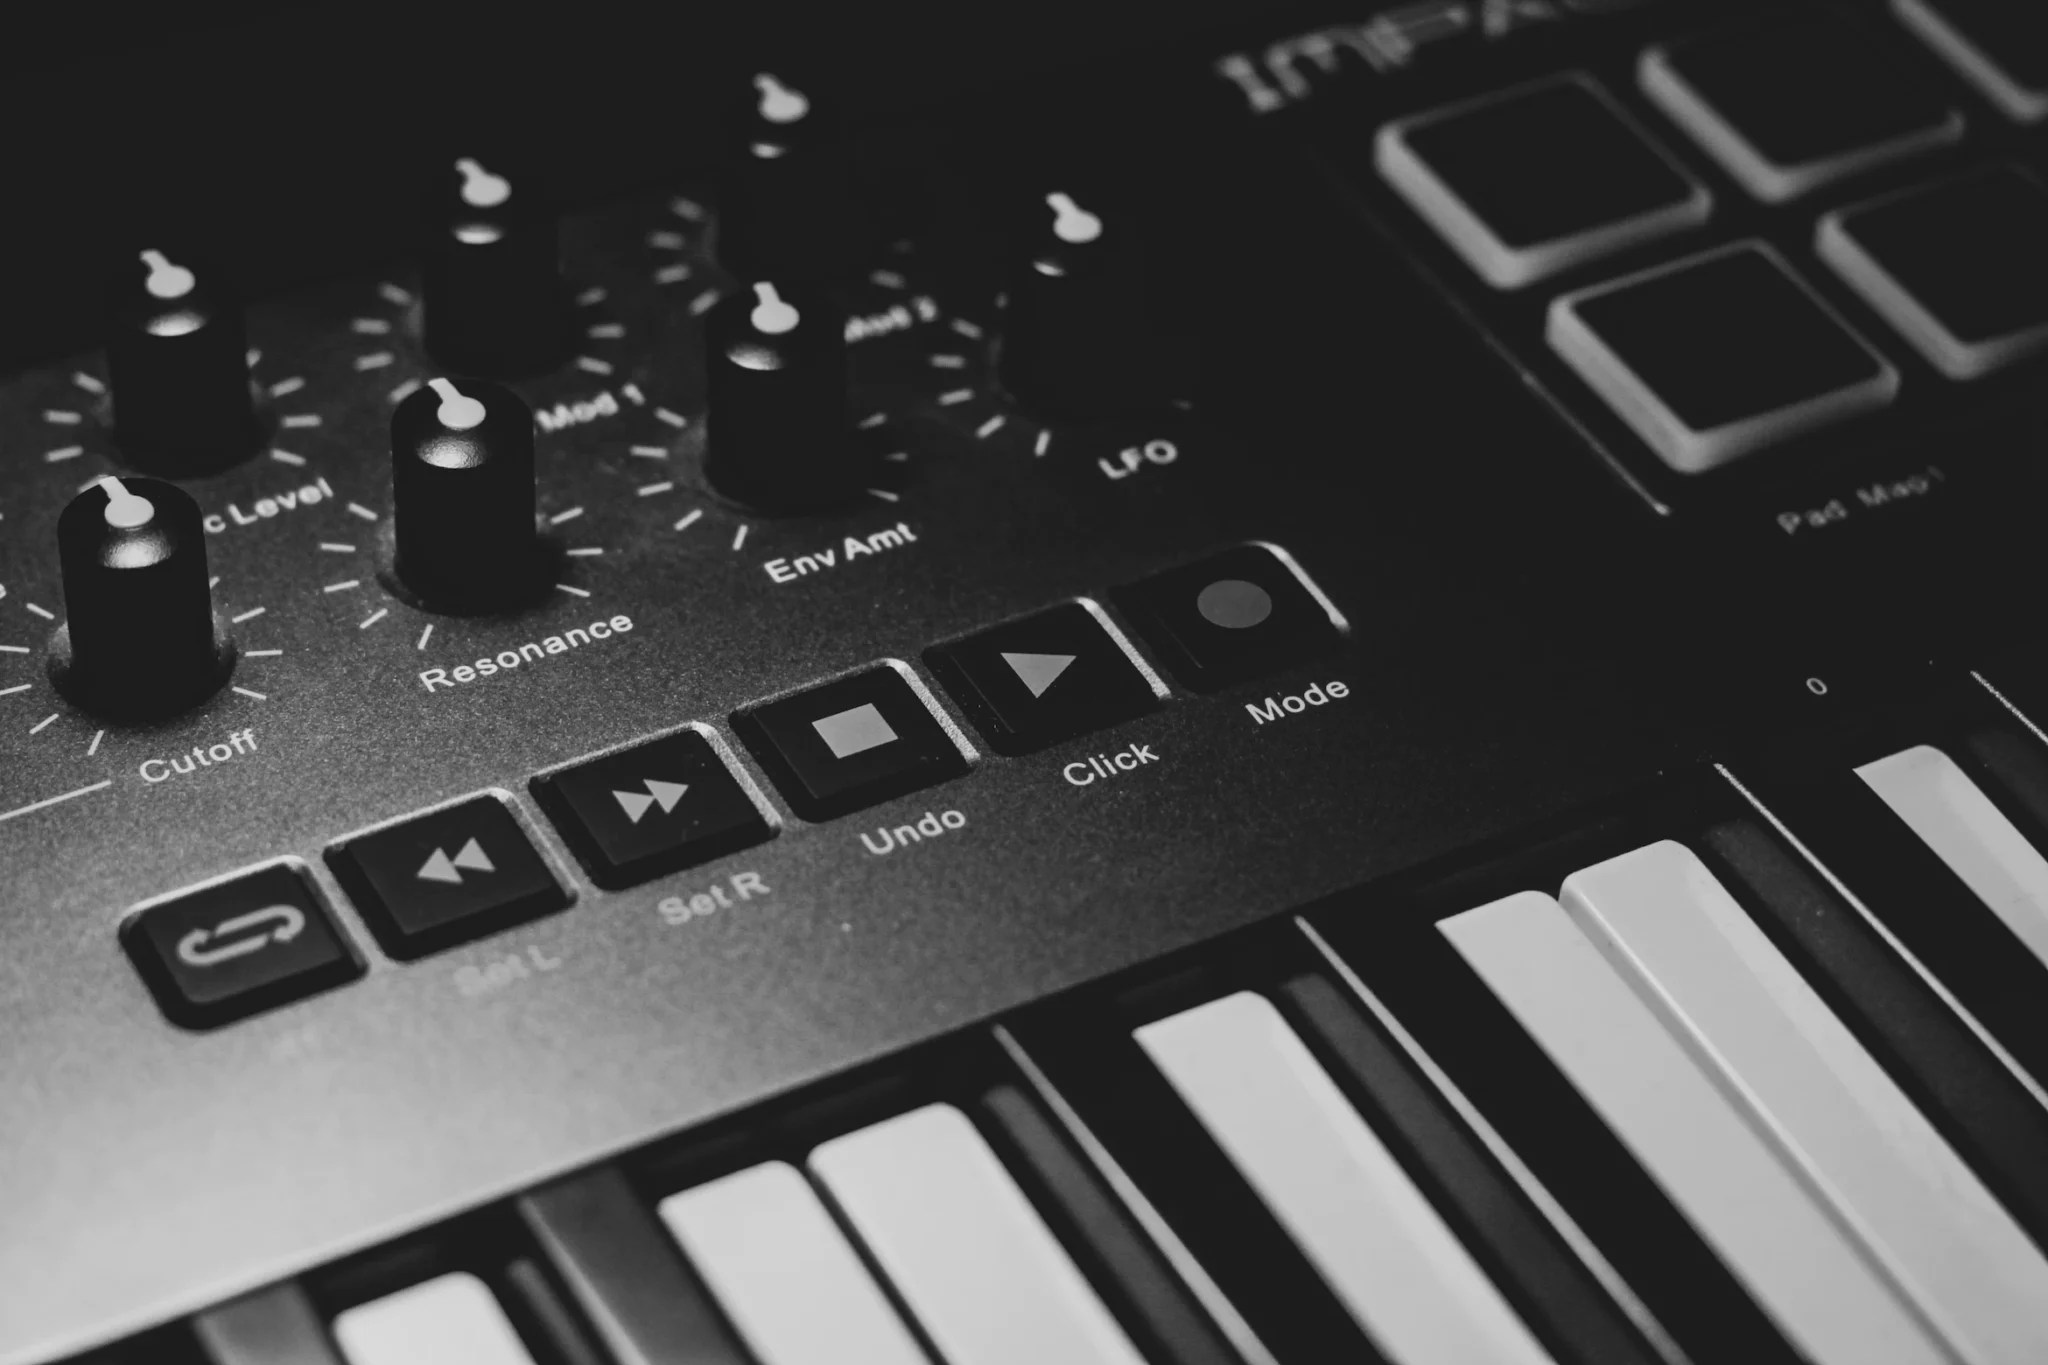 MIDI Sync: Combines What Two Types Of Sync